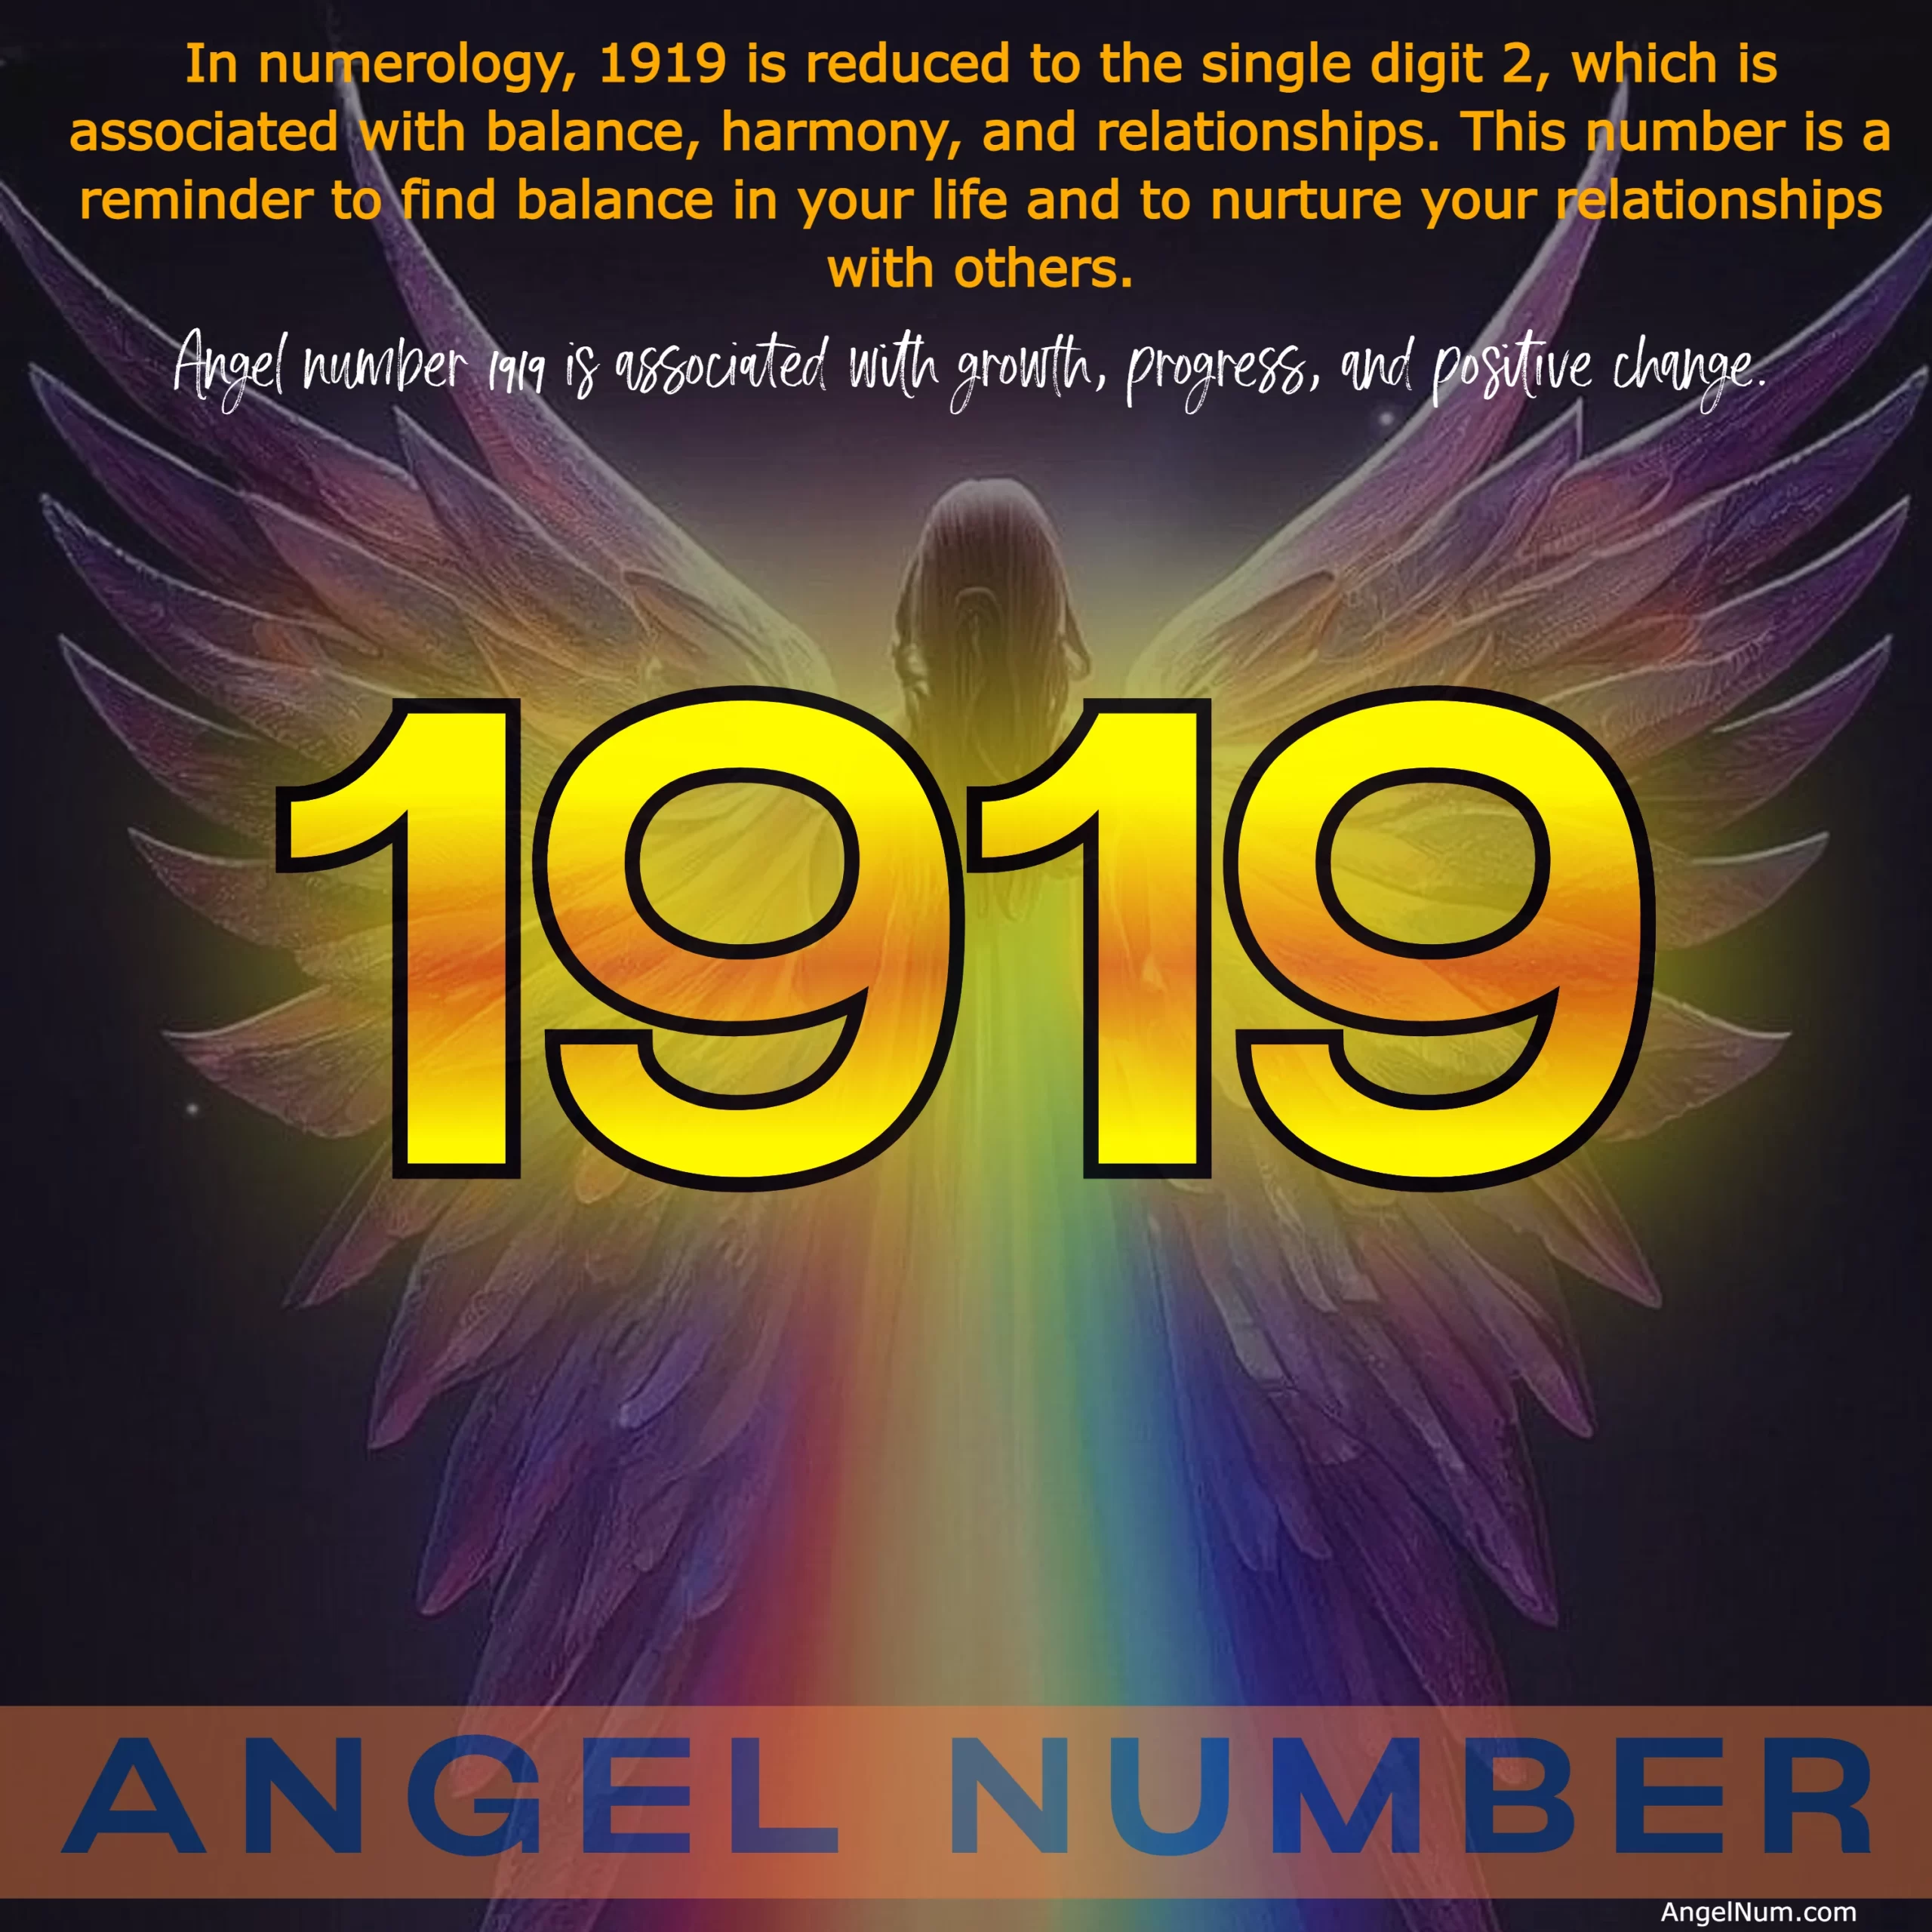 Angel Number 1919: Discover the Meaning and Significance